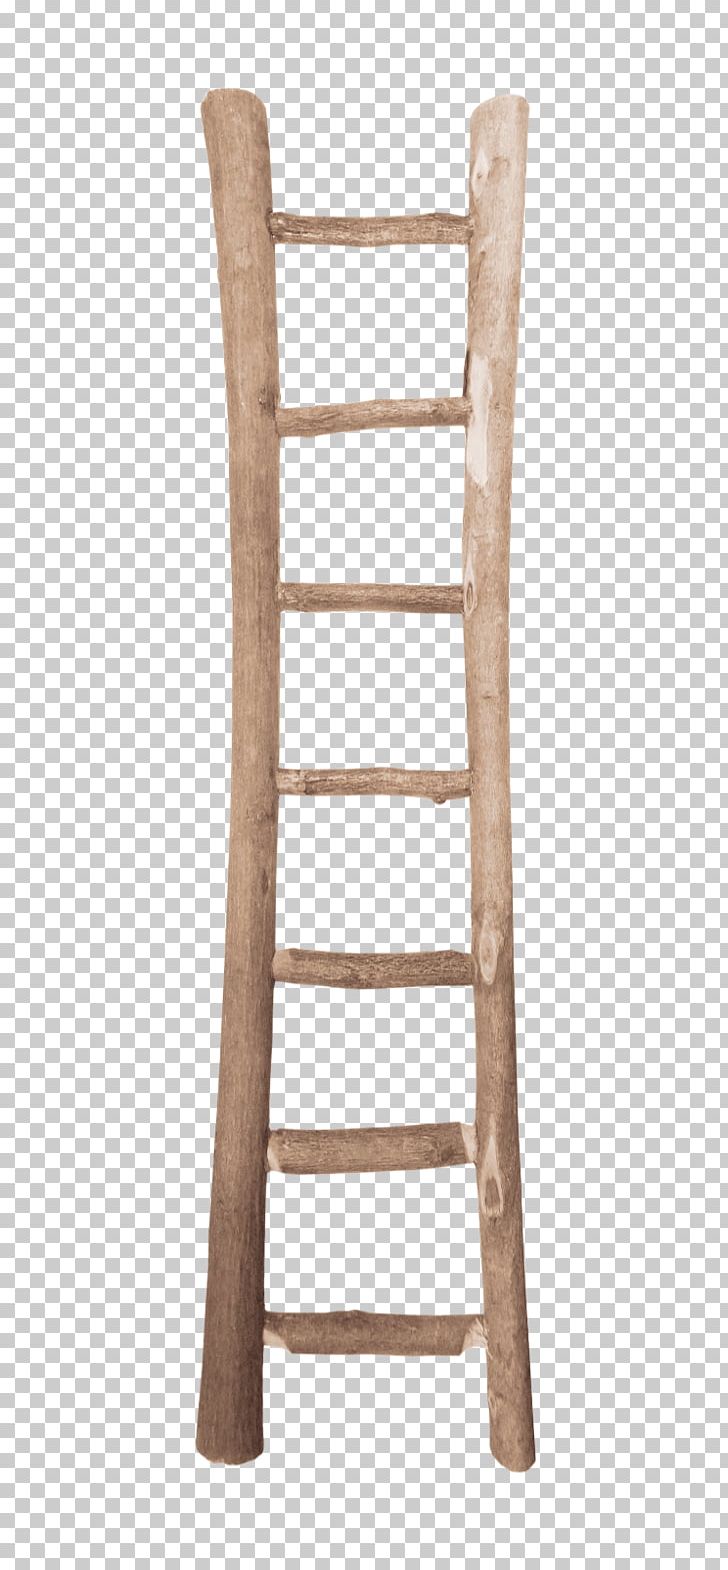 Ladder Wood Stairs Keukentrap PNG, Clipart, Chair, Creative, Creative Ladder, Euclidean Vector, Furniture Free PNG Download